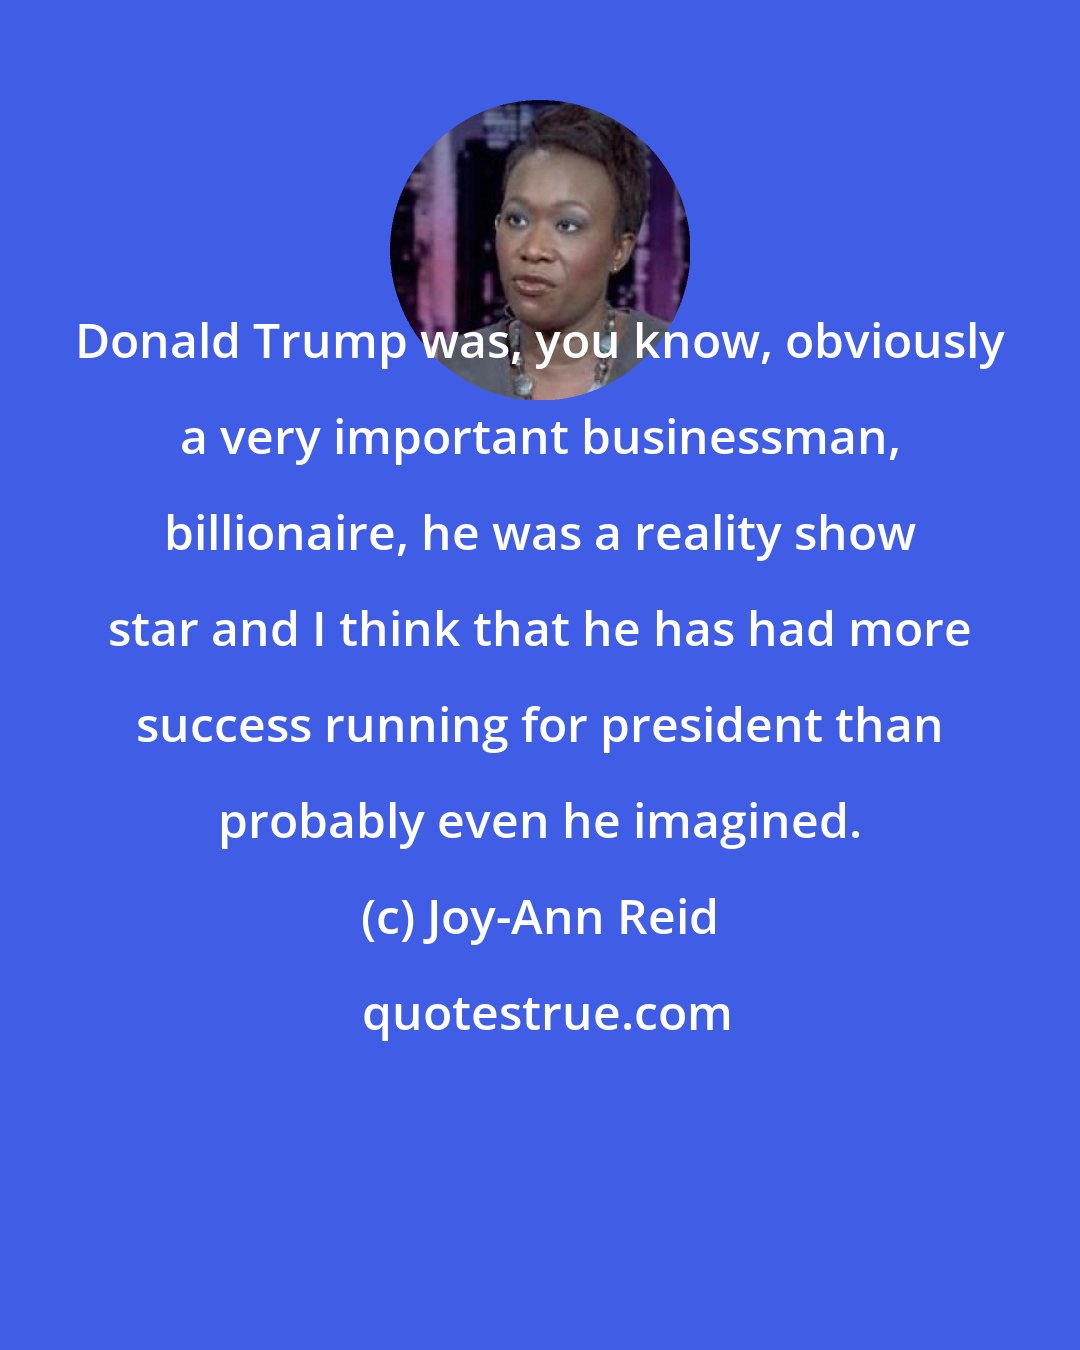 Joy-Ann Reid: Donald Trump was, you know, obviously a very important businessman, billionaire, he was a reality show star and I think that he has had more success running for president than probably even he imagined.